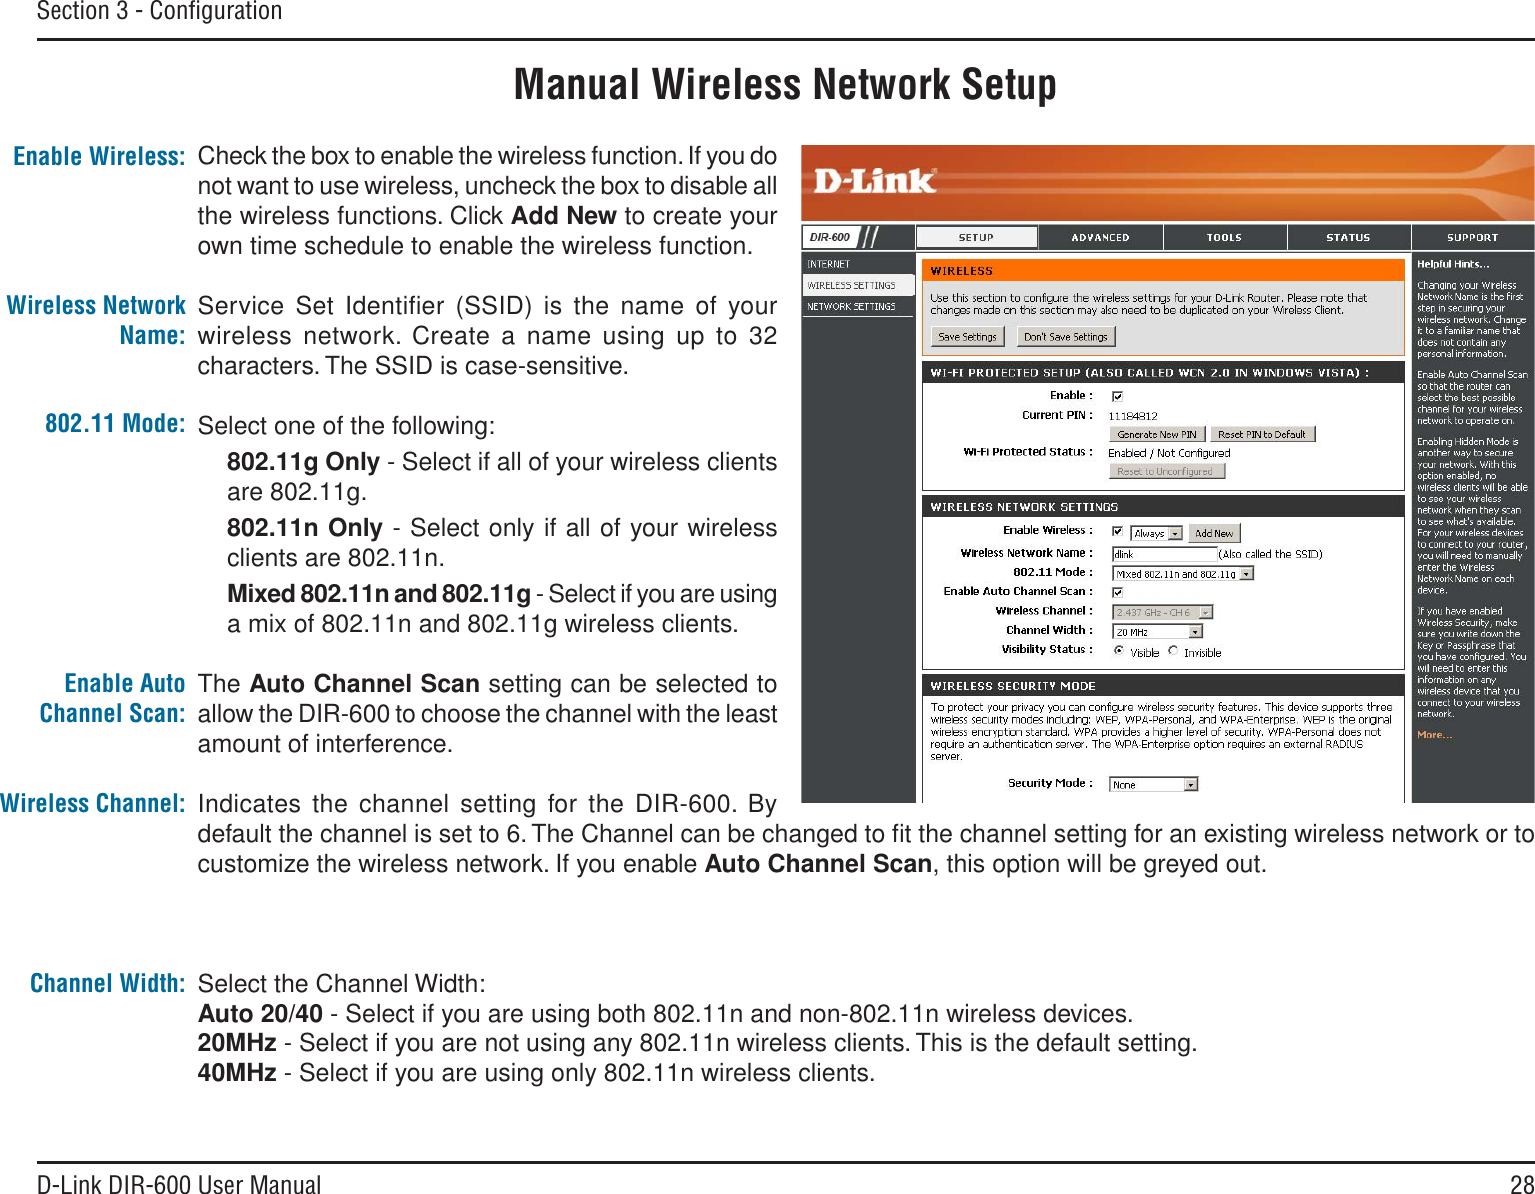 28D-Link DIR-600 User ManualSection 3 - ConﬁgurationManual Wireless Network SetupCheck the box to enable the wireless function. If you do not want to use wireless, uncheck the box to disable all the wireless functions. Click Add New to create your own time schedule to enable the wireless function. Service Set Identiﬁer (SSID) is the name of your wireless network. Create a name using up to 32 characters. The SSID is case-sensitive.Select one of the following:802.11g Only - Select if all of your wireless clients are 802.11g.802.11n Only - Select only if all of your wireless clients are 802.11n.Mixed 802.11n and 802.11g - Select if you are using a mix of 802.11n and 802.11g wireless clients.The Auto Channel Scan setting can be selected to allow the DIR-600 to choose the channel with the least amount of interference.Indicates the channel setting for the DIR-600. By default the channel is set to 6. The Channel can be changed to ﬁt the channel setting for an existing wireless network or to customize the wireless network. If you enable Auto Channel Scan, this option will be greyed out.Select the Channel Width:Auto 20/40 - Select if you are using both 802.11n and non-802.11n wireless devices.20MHz - Select if you are not using any 802.11n wireless clients. This is the default setting. 40MHz - Select if you are using only 802.11n wireless clients.  Enable Wireless:Wireless Network Name:802.11 Mode:Enable Auto Channel Scan:Wireless Channel:Channel Width: